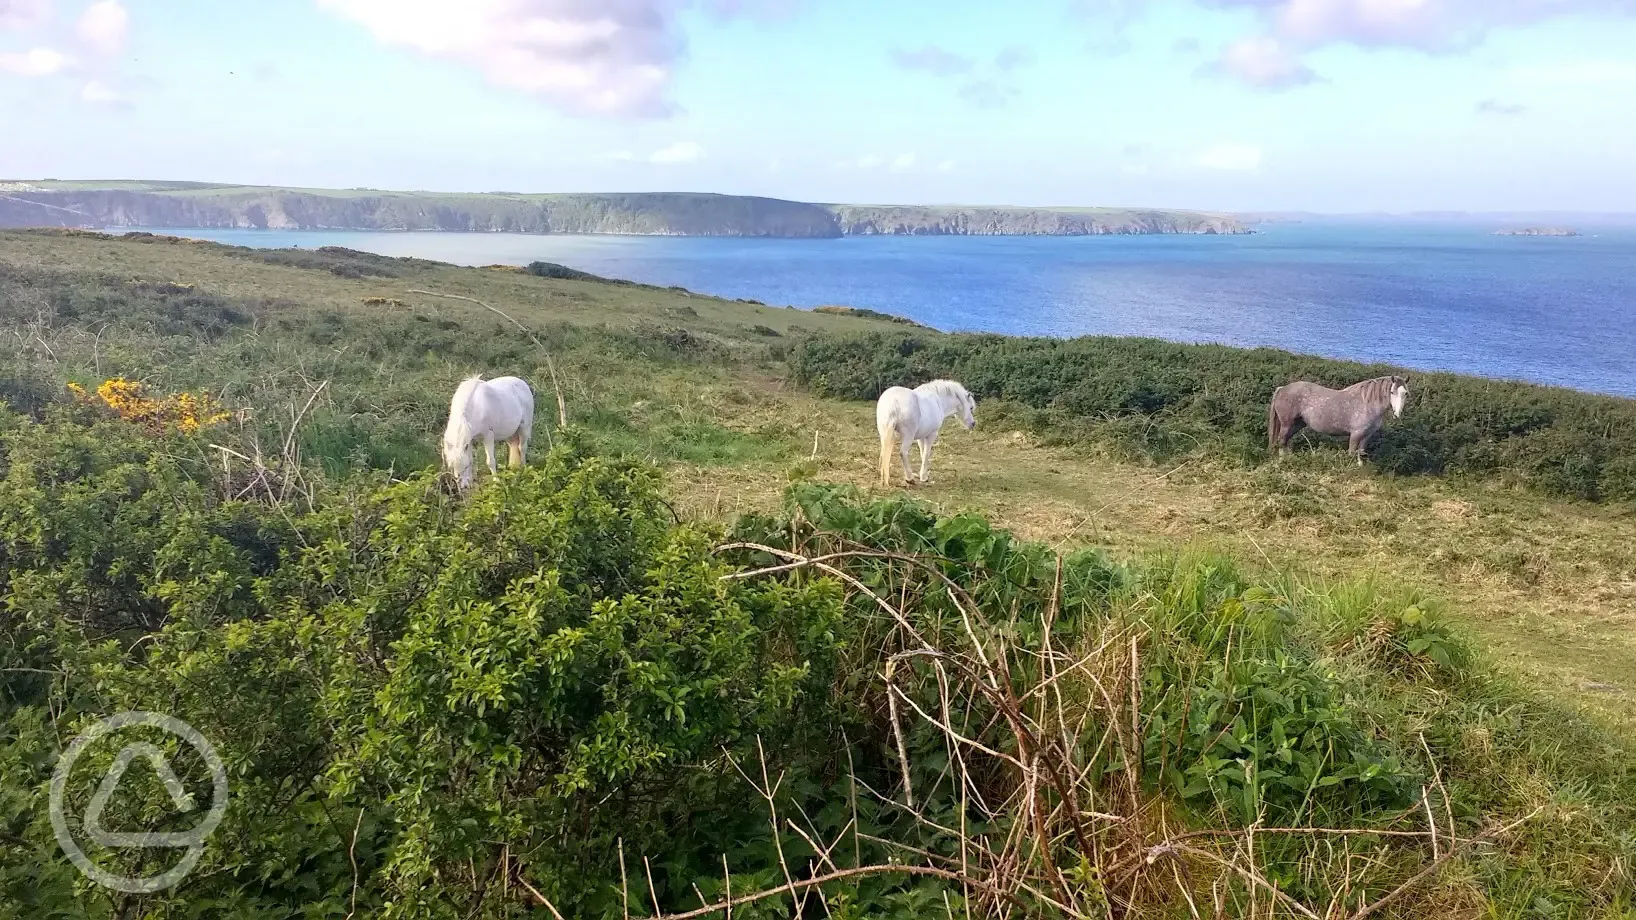 Ponies on the Pembrokeshire Coastal Path nearby